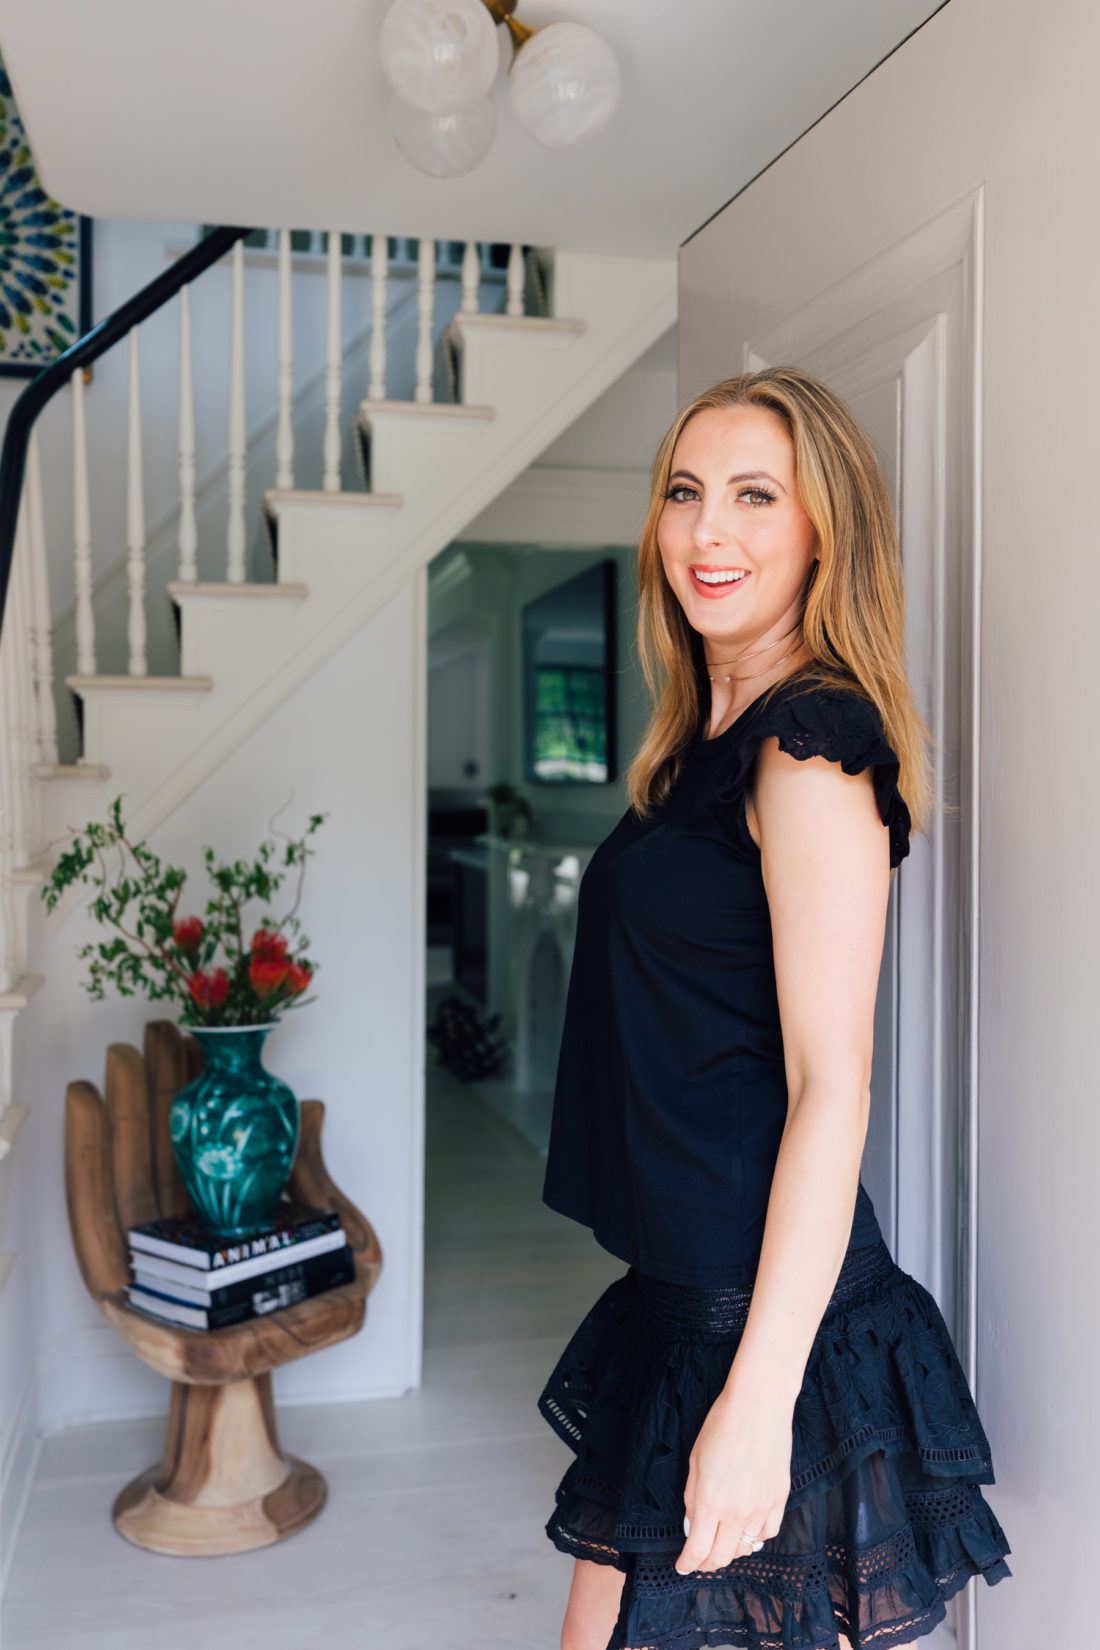 Eva Amurri Martino stands in the doorway of her newly renovated Connecticut home